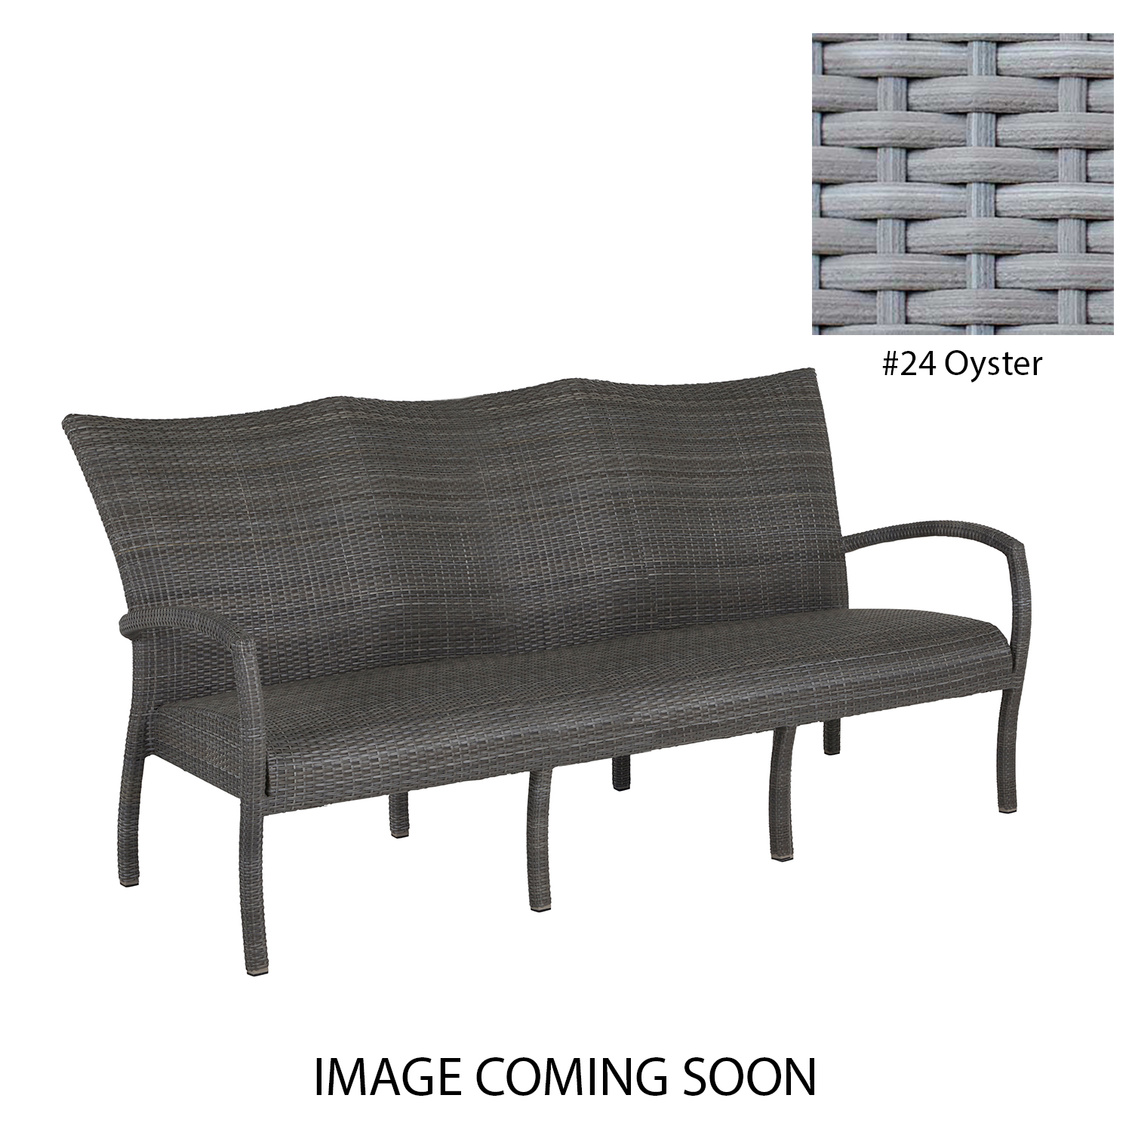 skye plus woven sofa in oyster product image